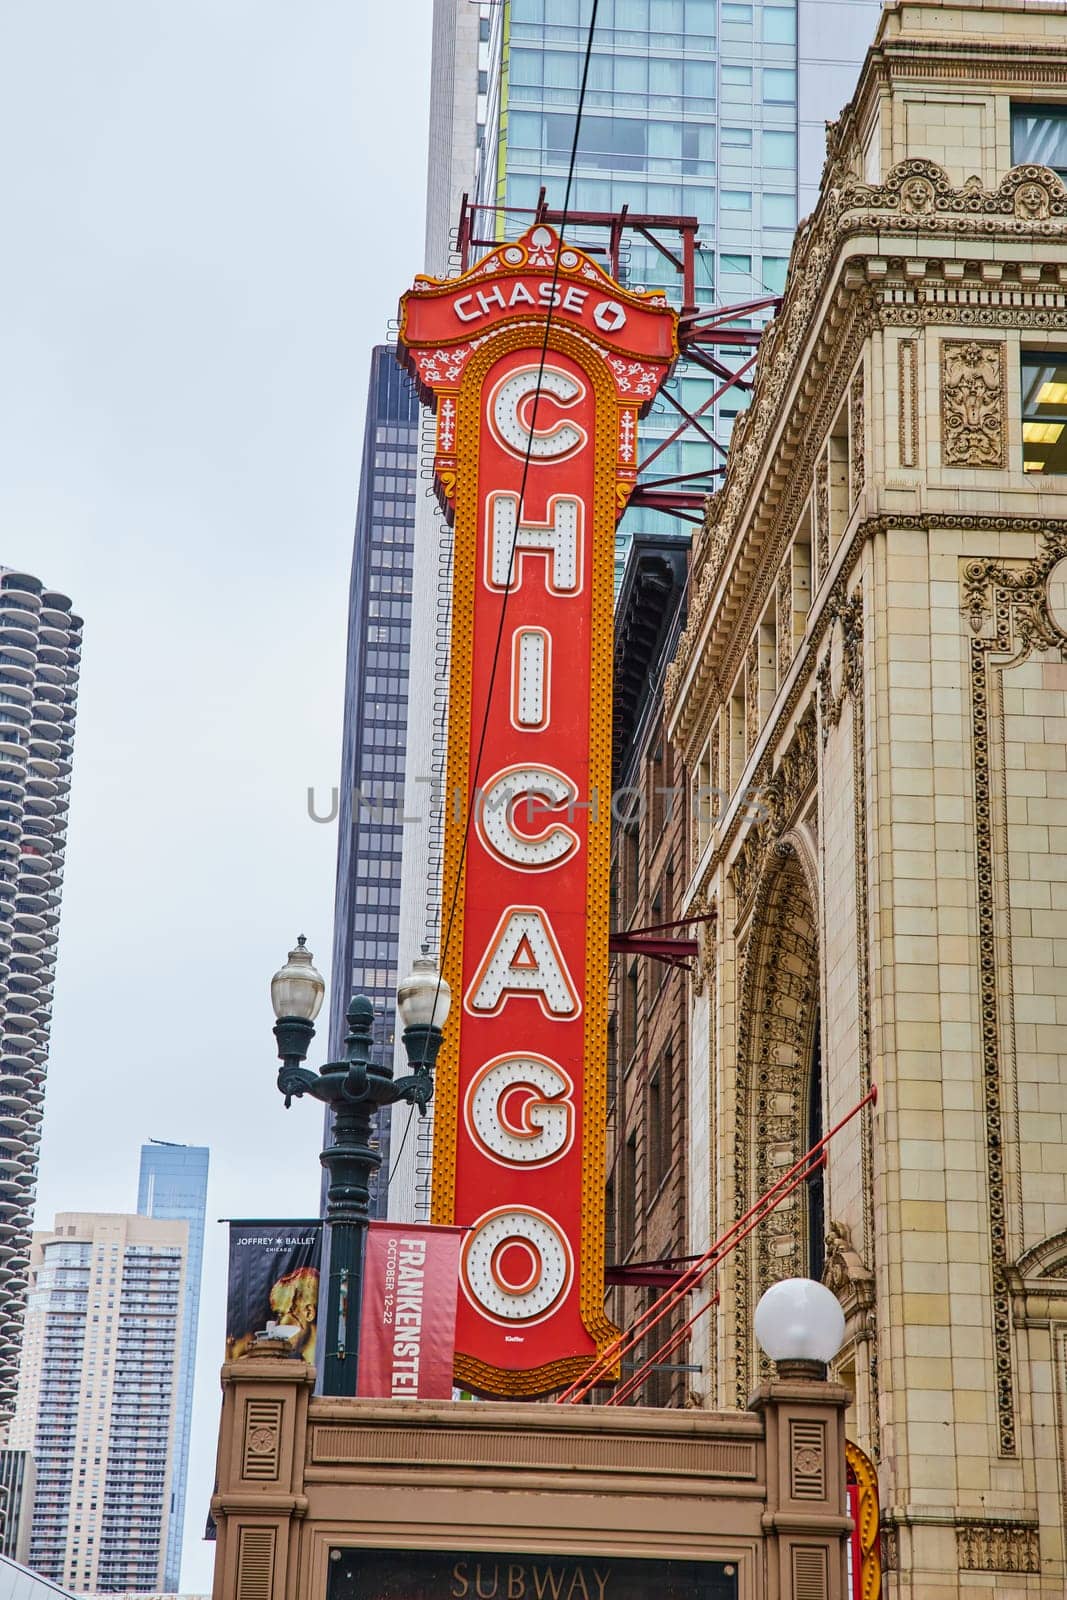 Image of Large orange Chicago sign with white lettering on old historic building in city